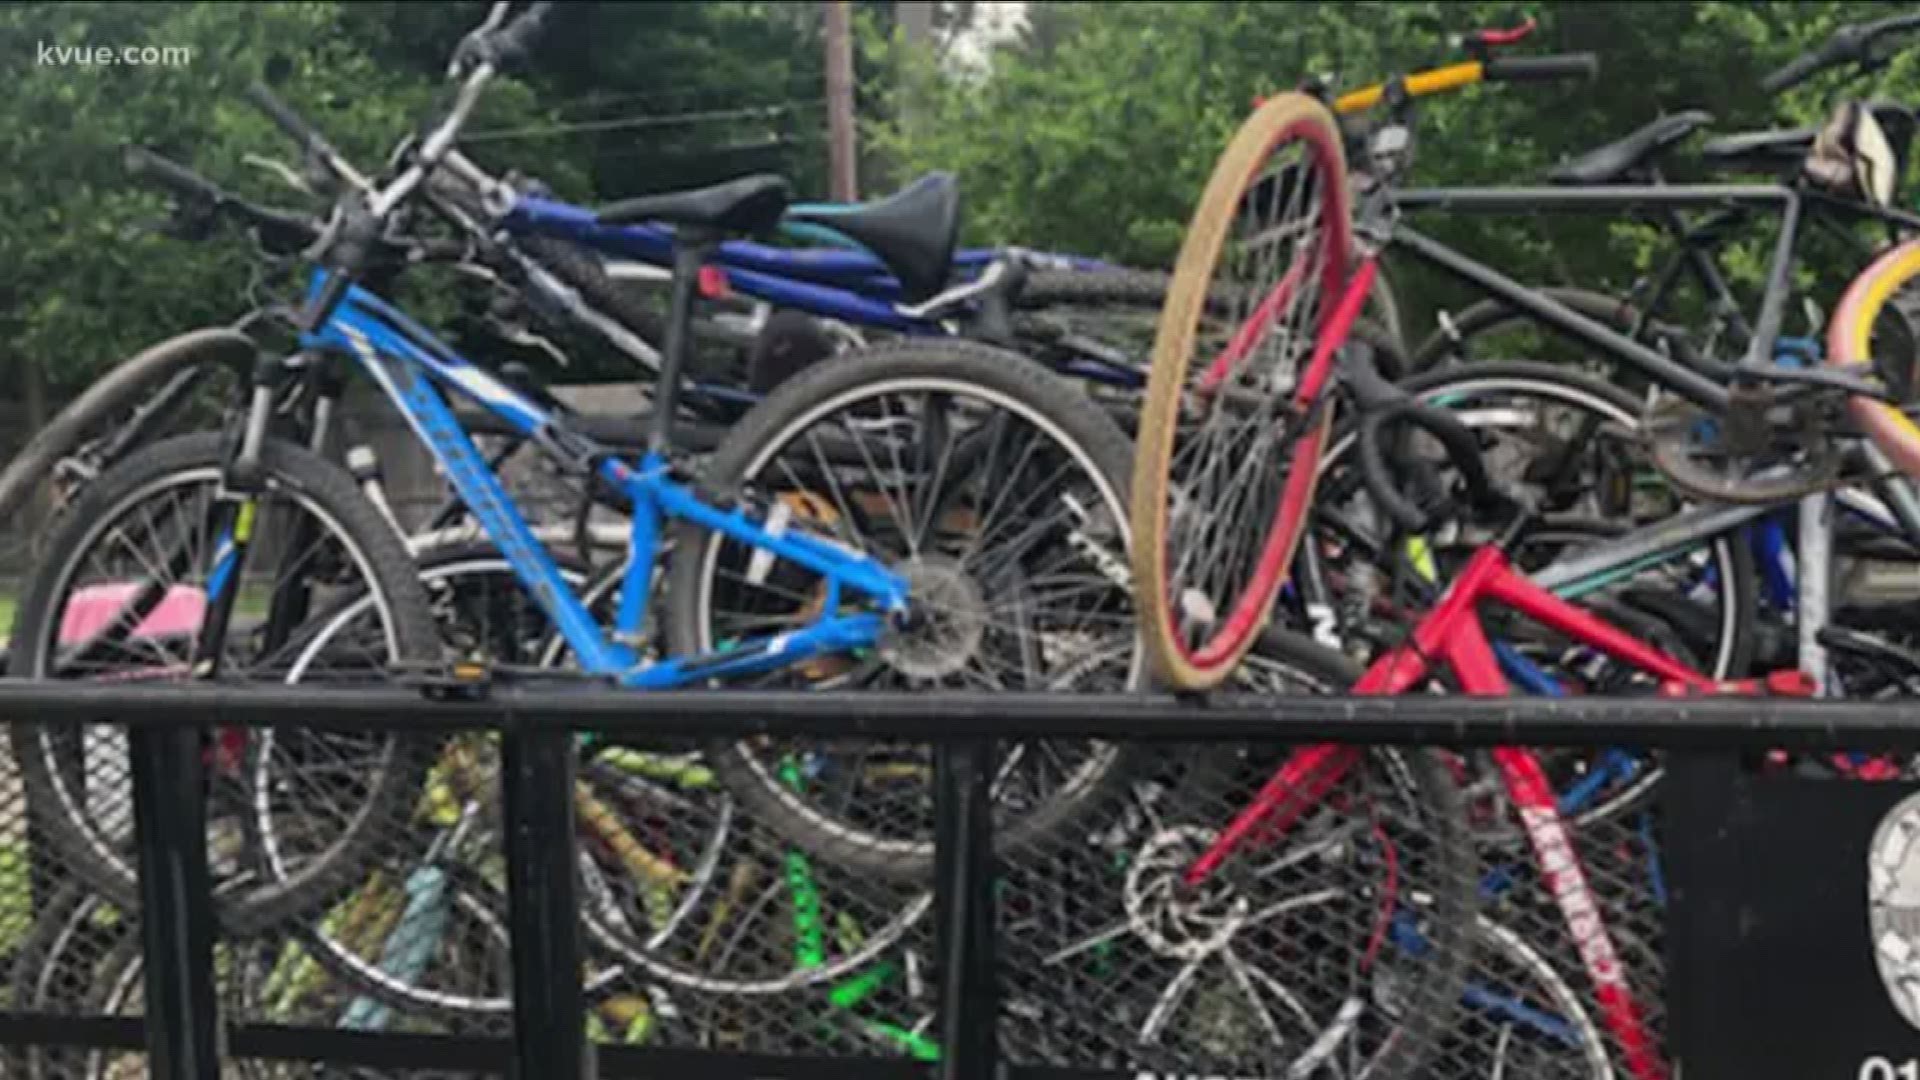 It may look like just a bunch of bikes, but police say all of them are stolen and they were used to help homeless people buy drugs.